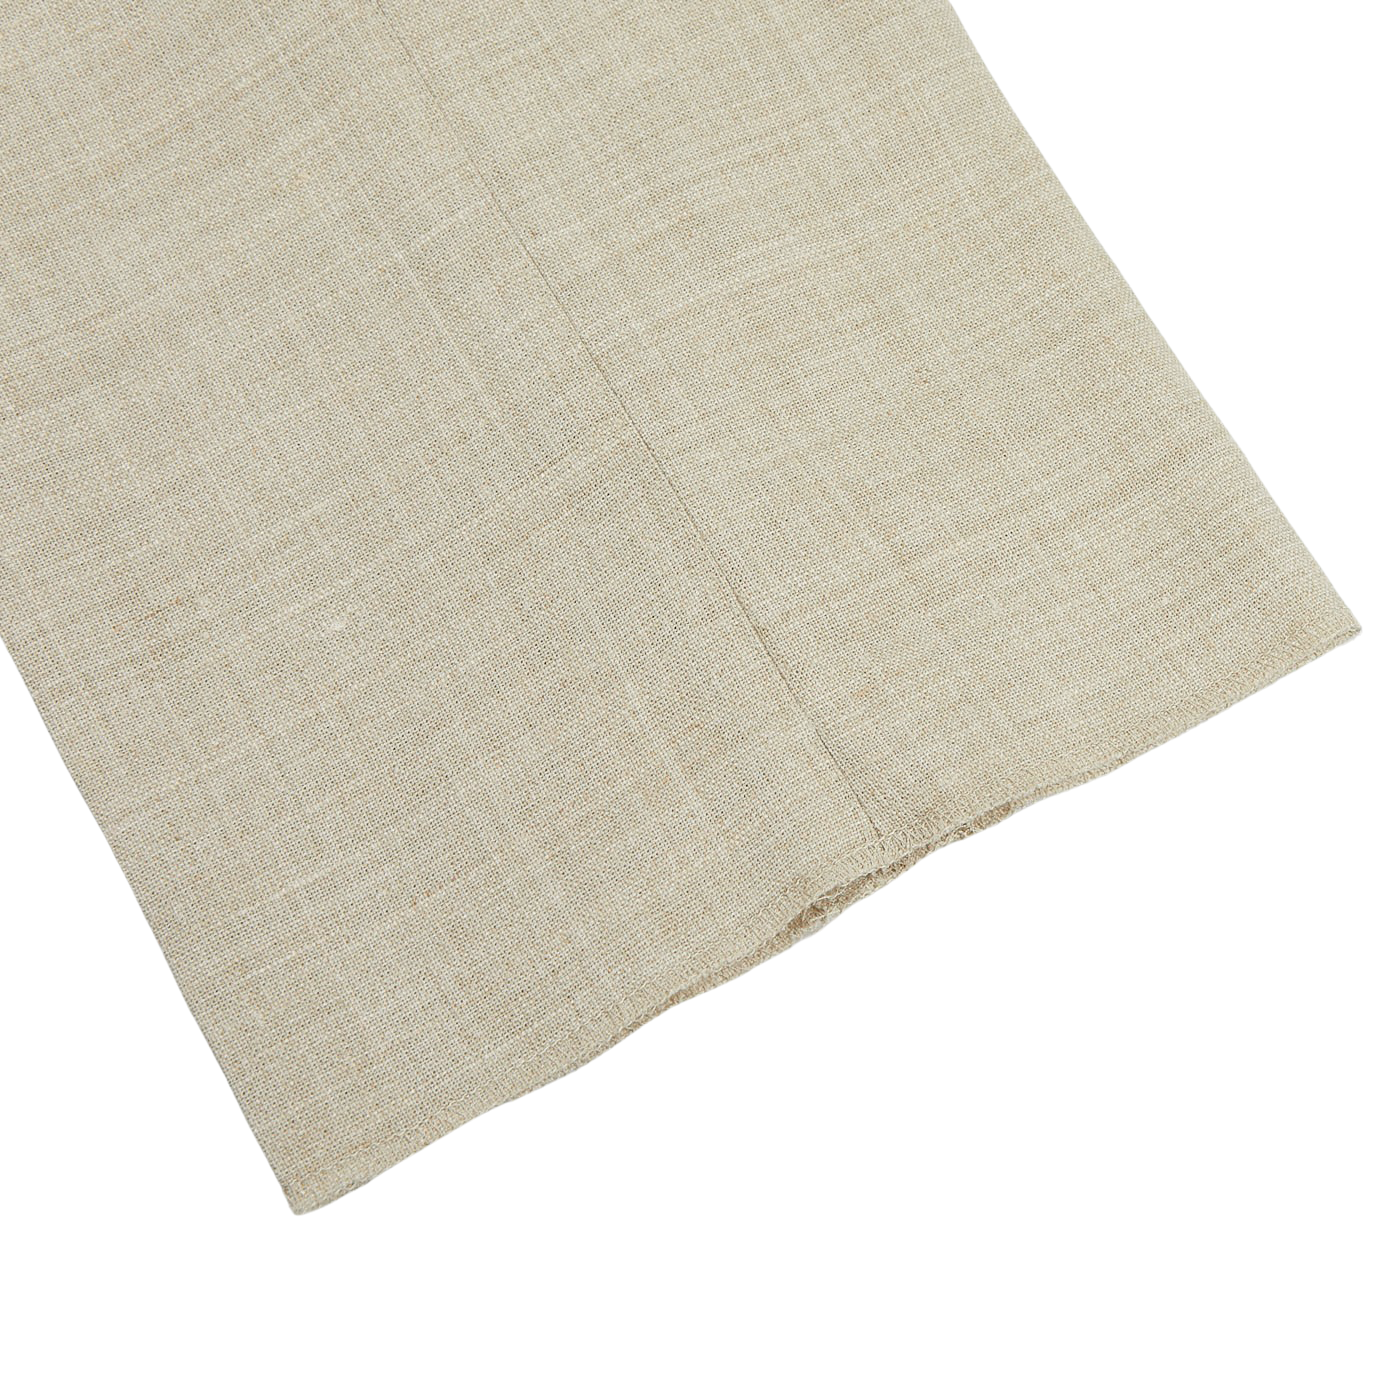 A Beige Melange Wool Linen Pleated Trousers with a tailored fit on a white surface. (Brand: Baltzar Sartorial)